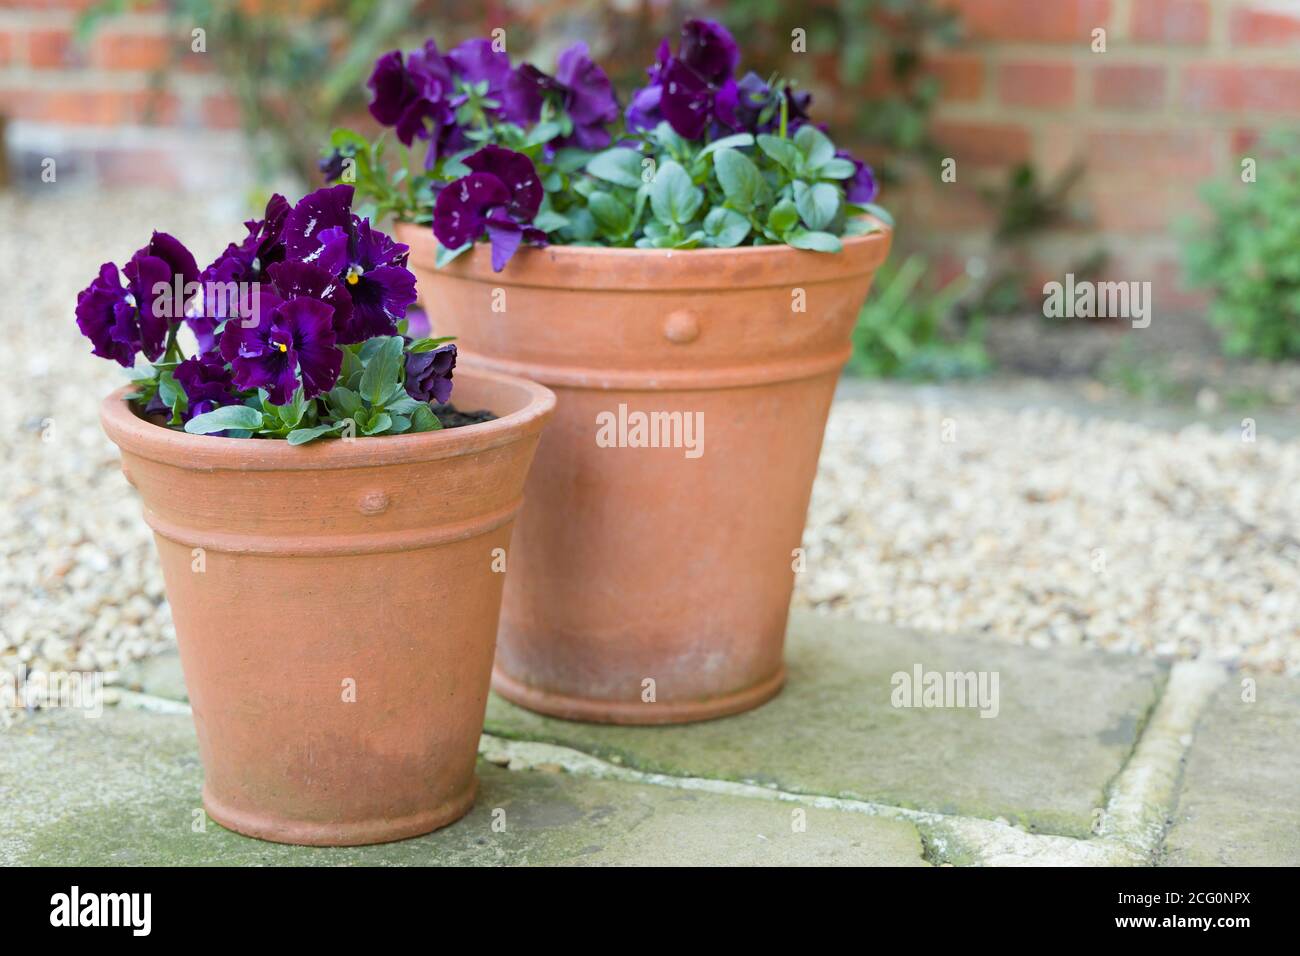 Pansy flowers, purple pansies, winter to spring flowering Pansy Ruffles plants in garden pots on a patio, UK Stock Photo